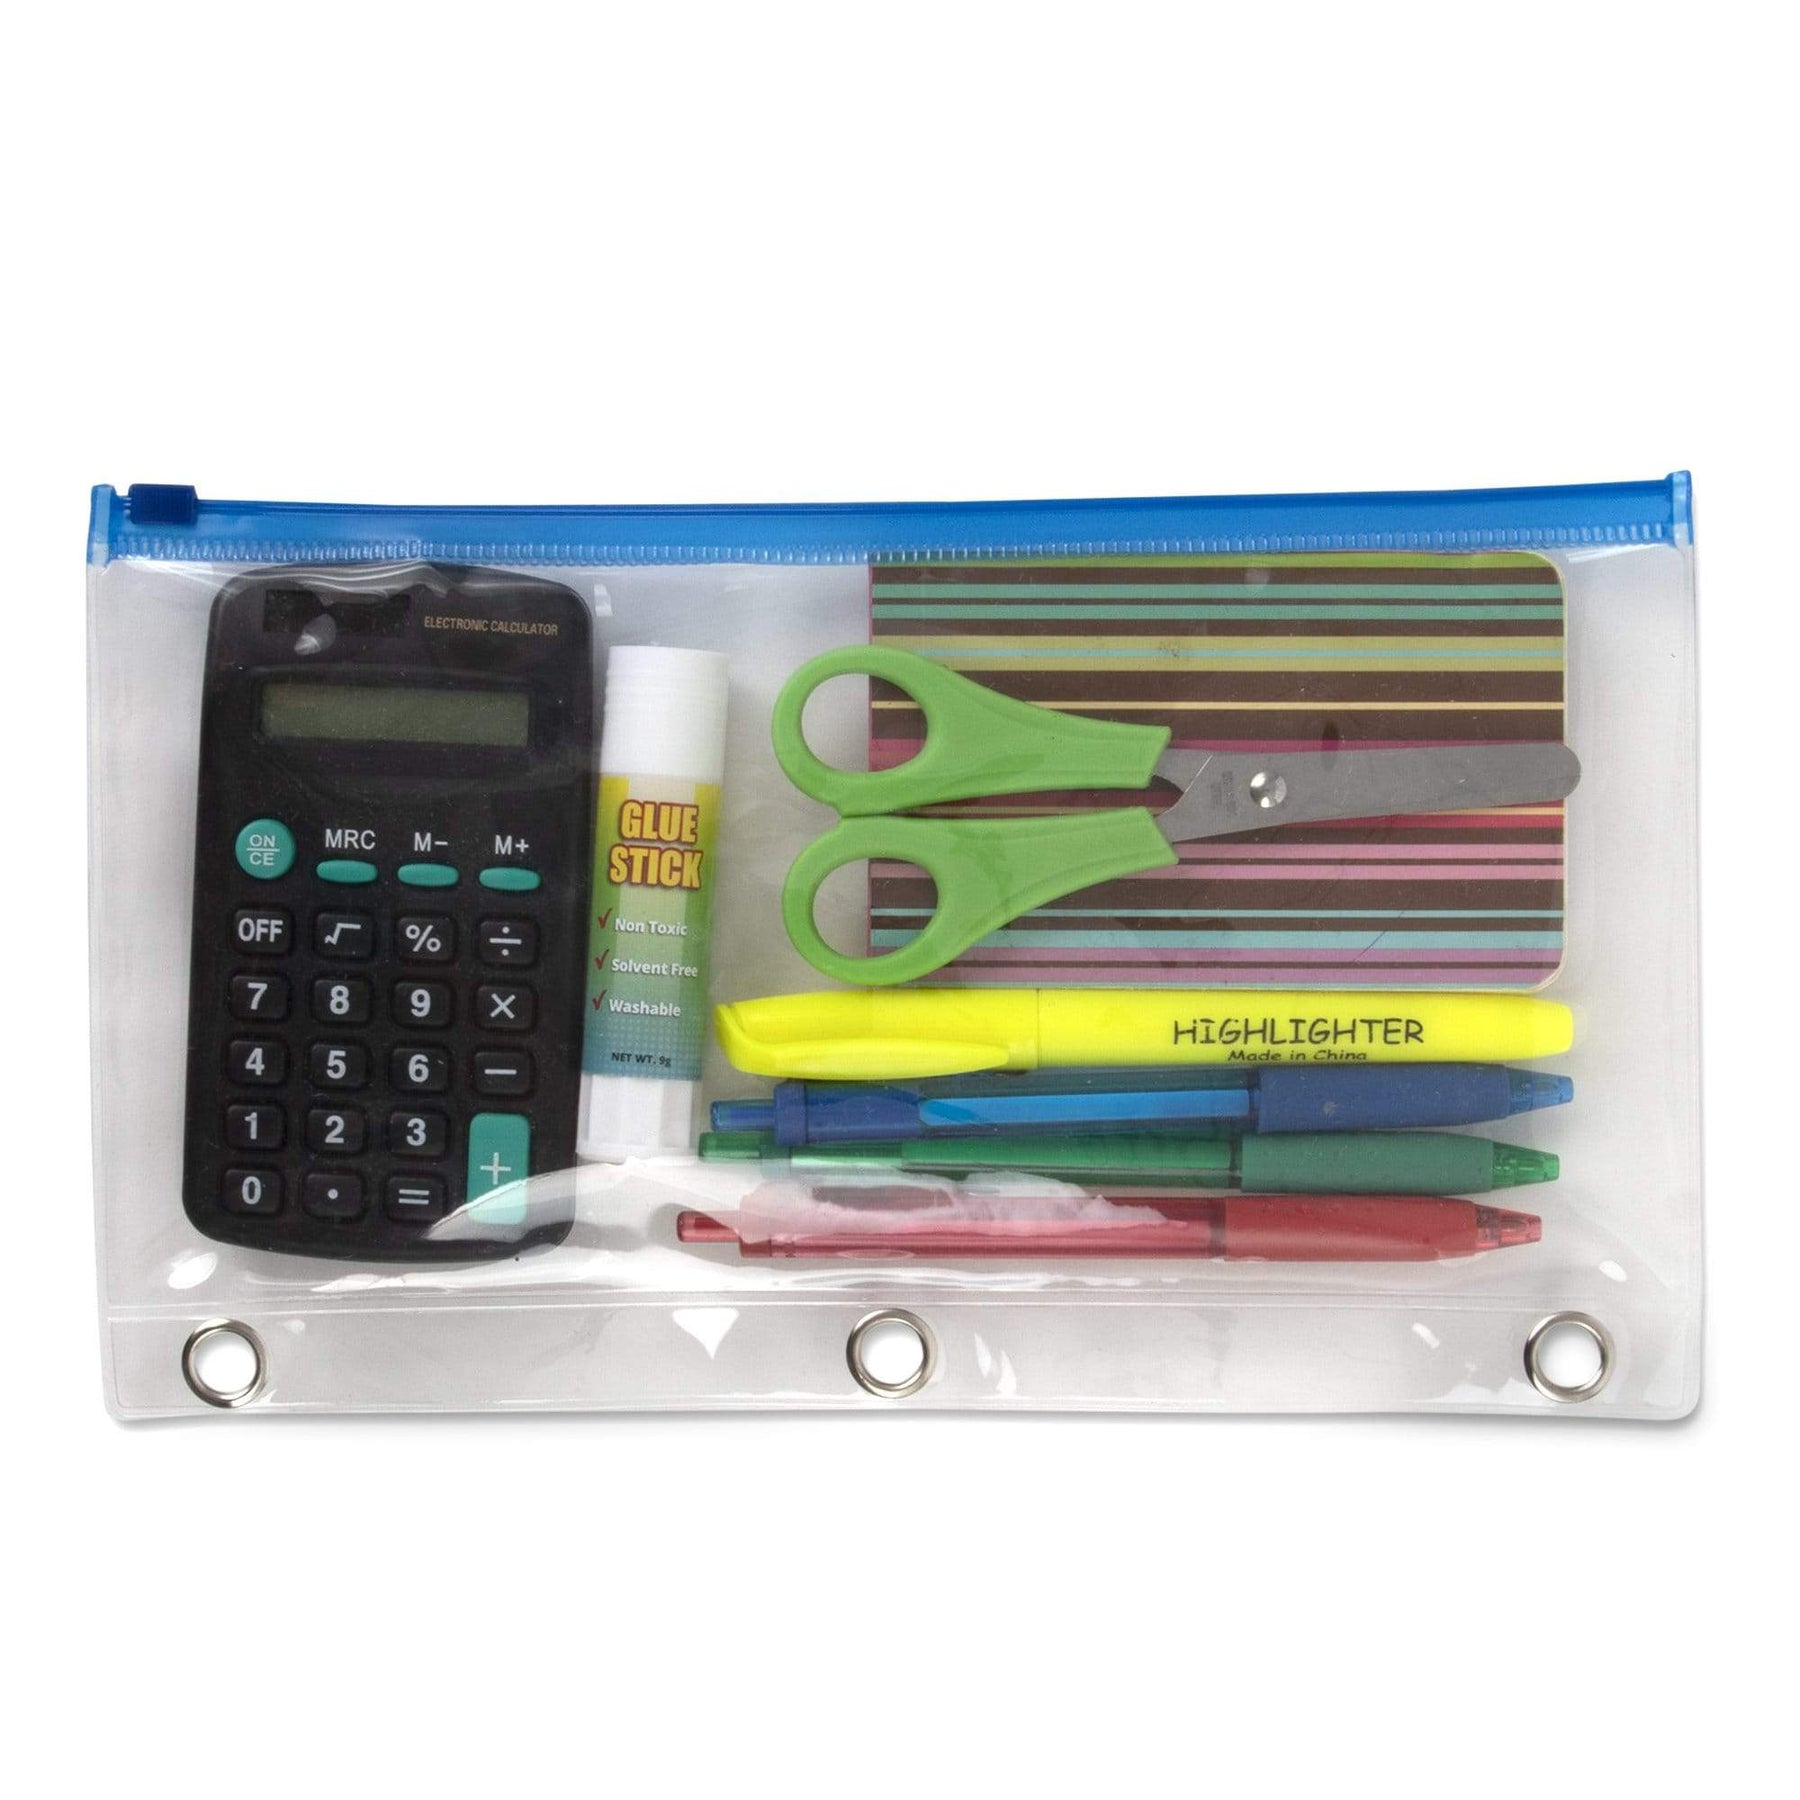 Wholesale 3 Ring Binder Clear Pencil Case - Assorted